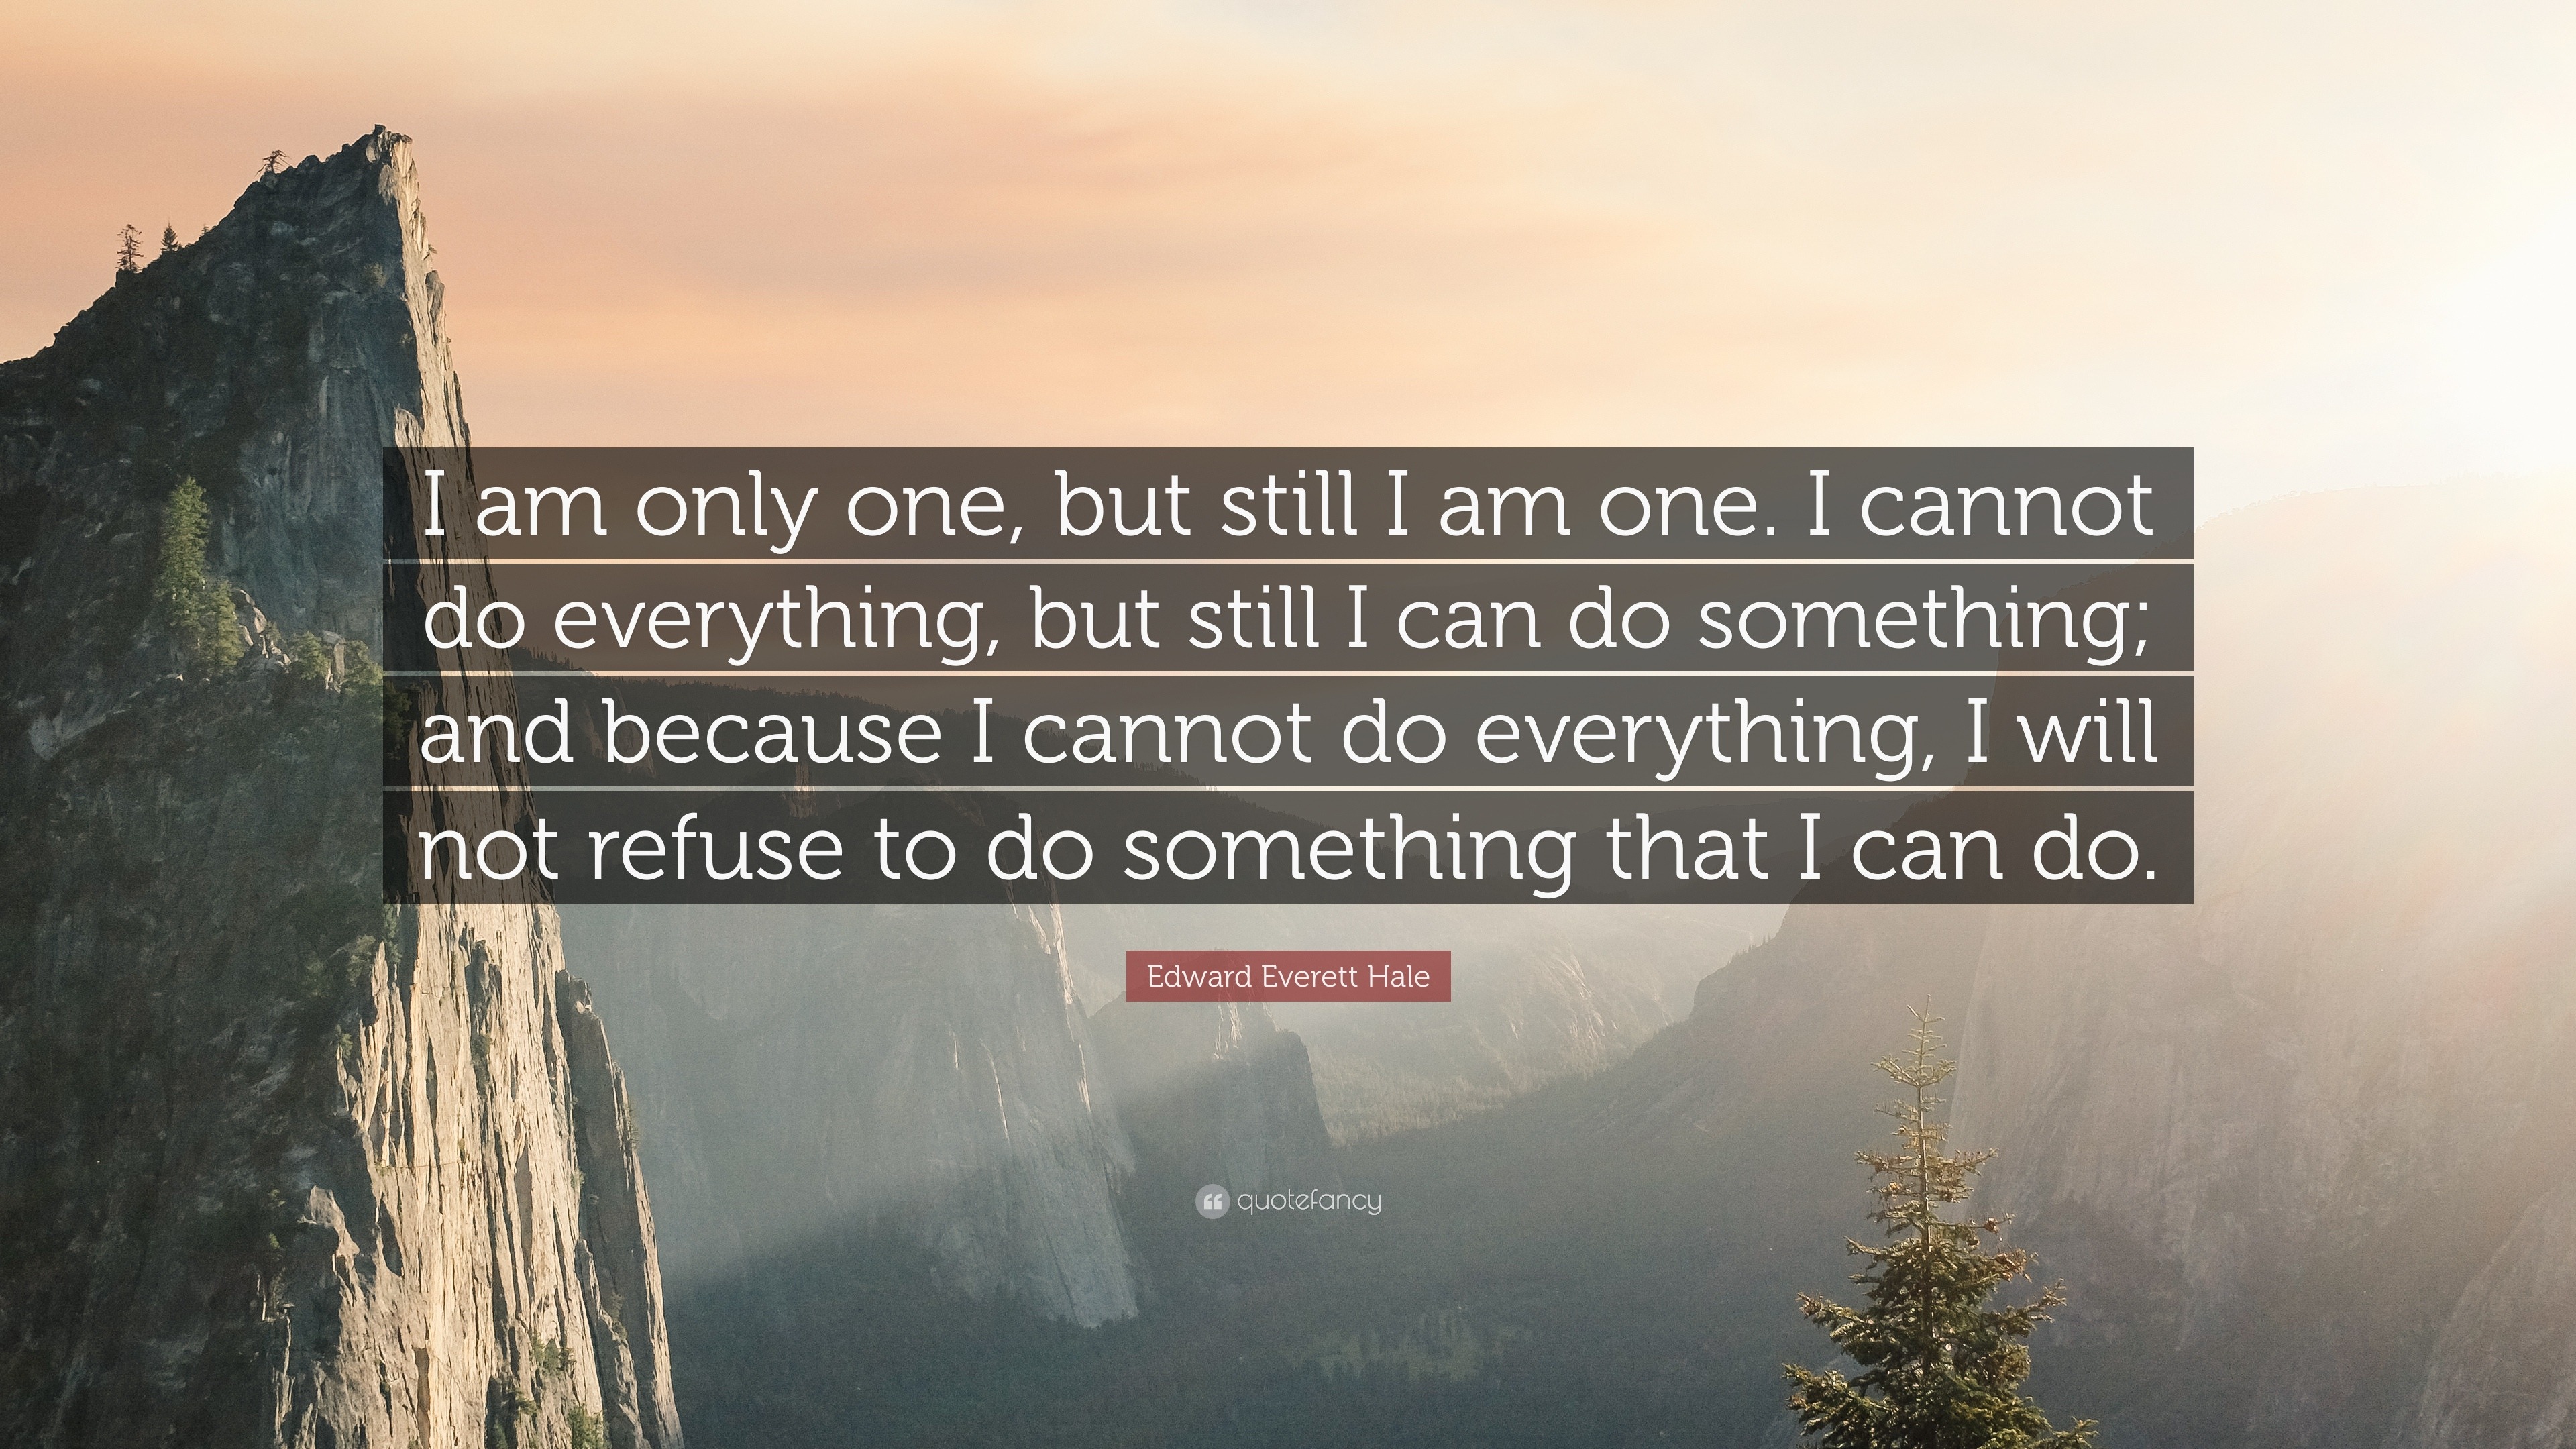 Edward Everett Hale Quote: "I am only one, but still I am ...